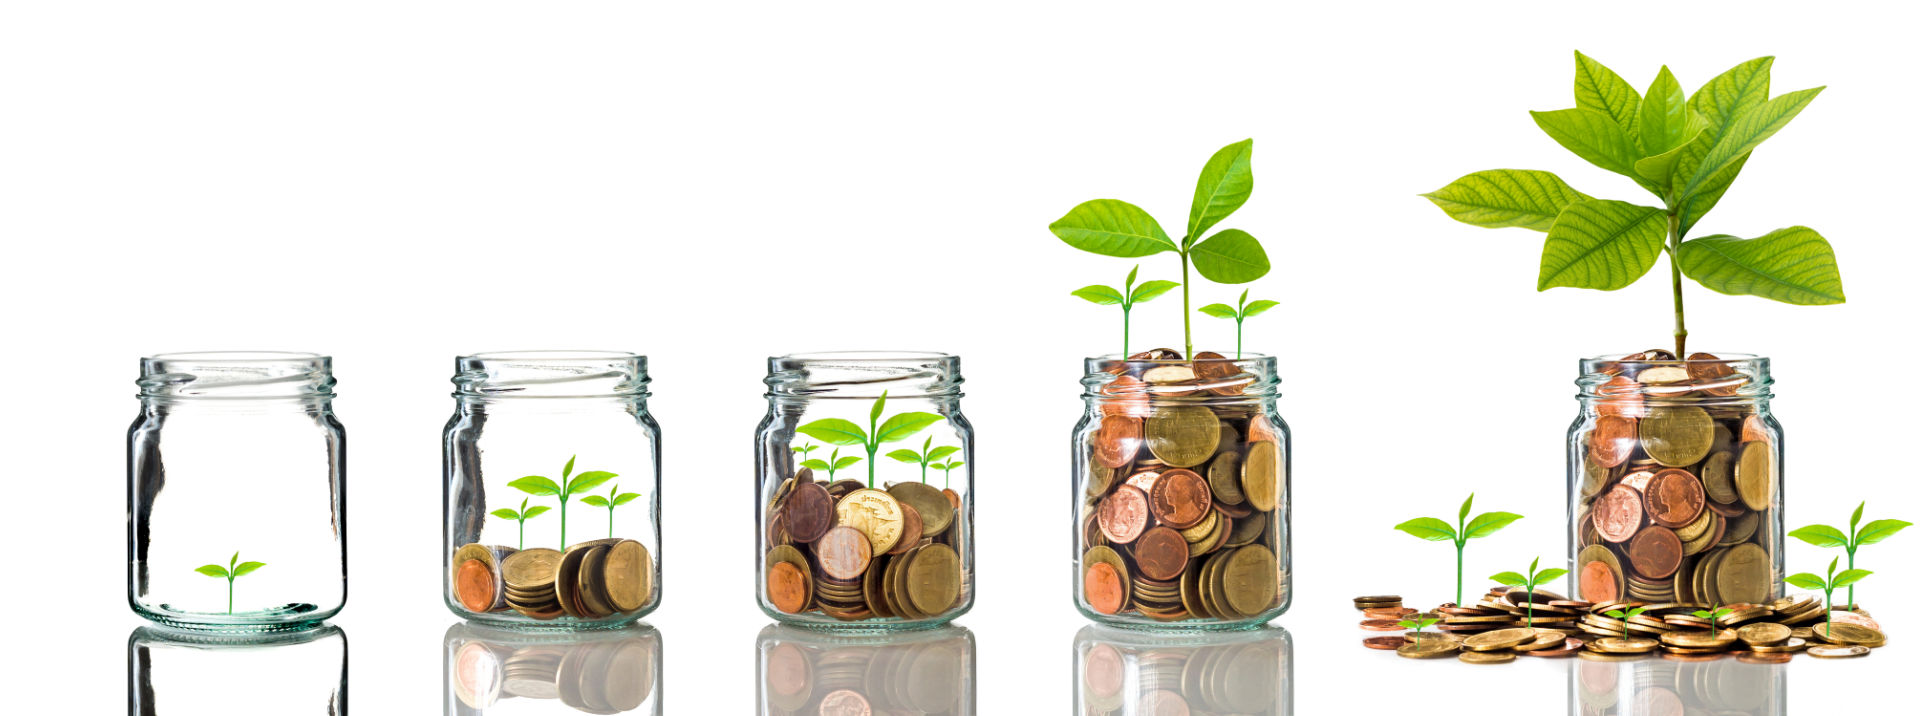 Personal Savings Account - Five glass jars containing coins with seedlings sprouting | Ozark Bank